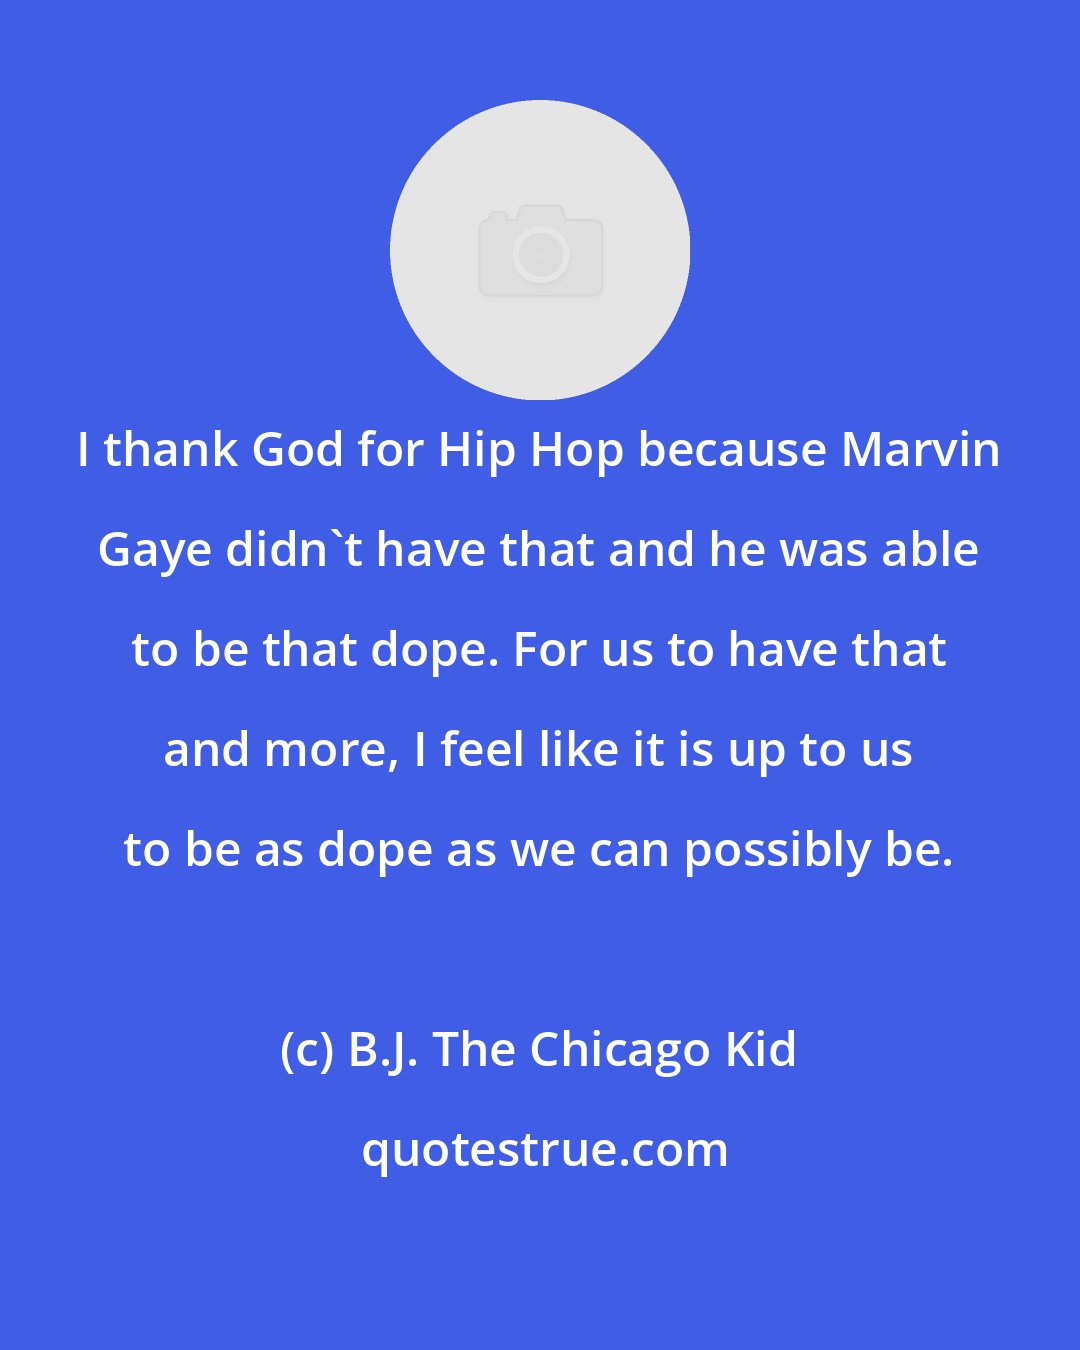 B.J. The Chicago Kid: I thank God for Hip Hop because Marvin Gaye didn't have that and he was able to be that dope. For us to have that and more, I feel like it is up to us to be as dope as we can possibly be.